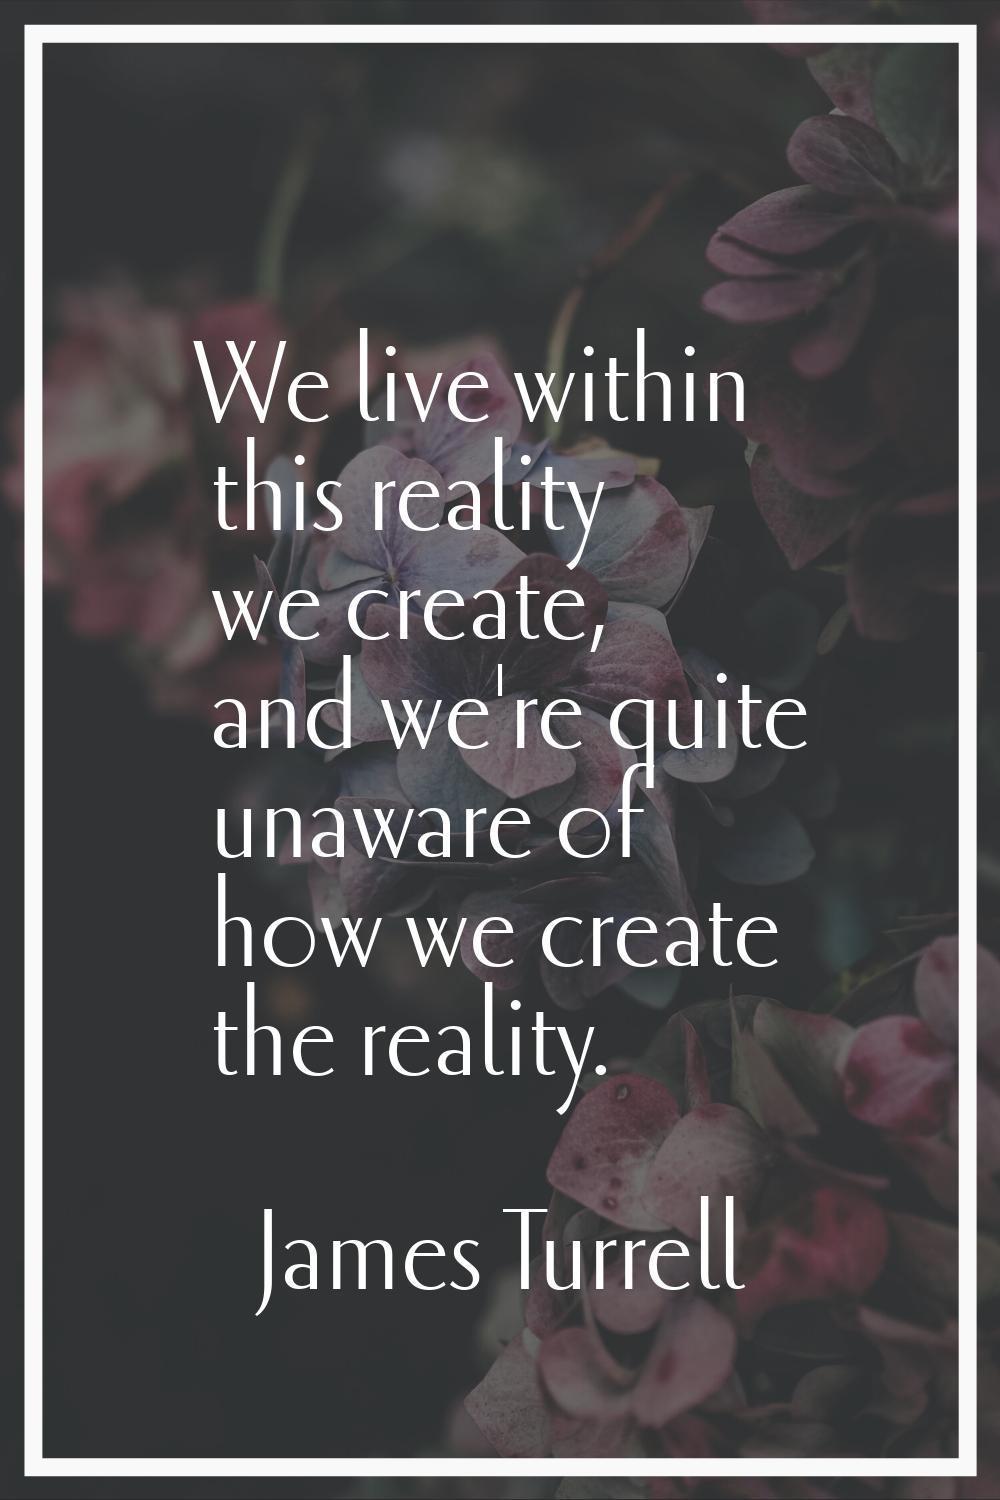 We live within this reality we create, and we're quite unaware of how we create the reality.